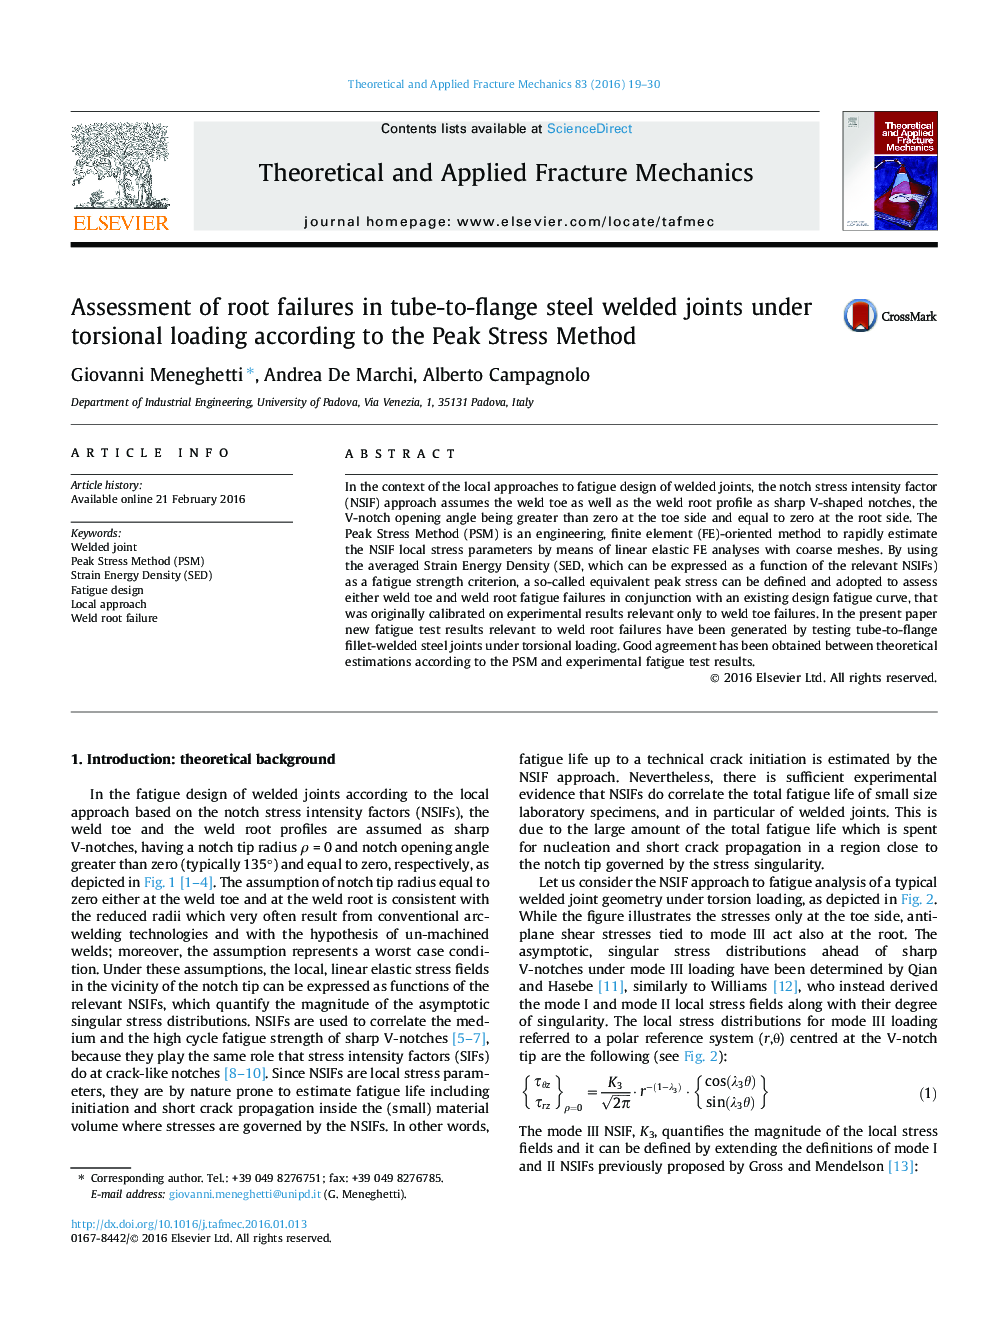 Assessment of root failures in tube-to-flange steel welded joints under torsional loading according to the Peak Stress Method